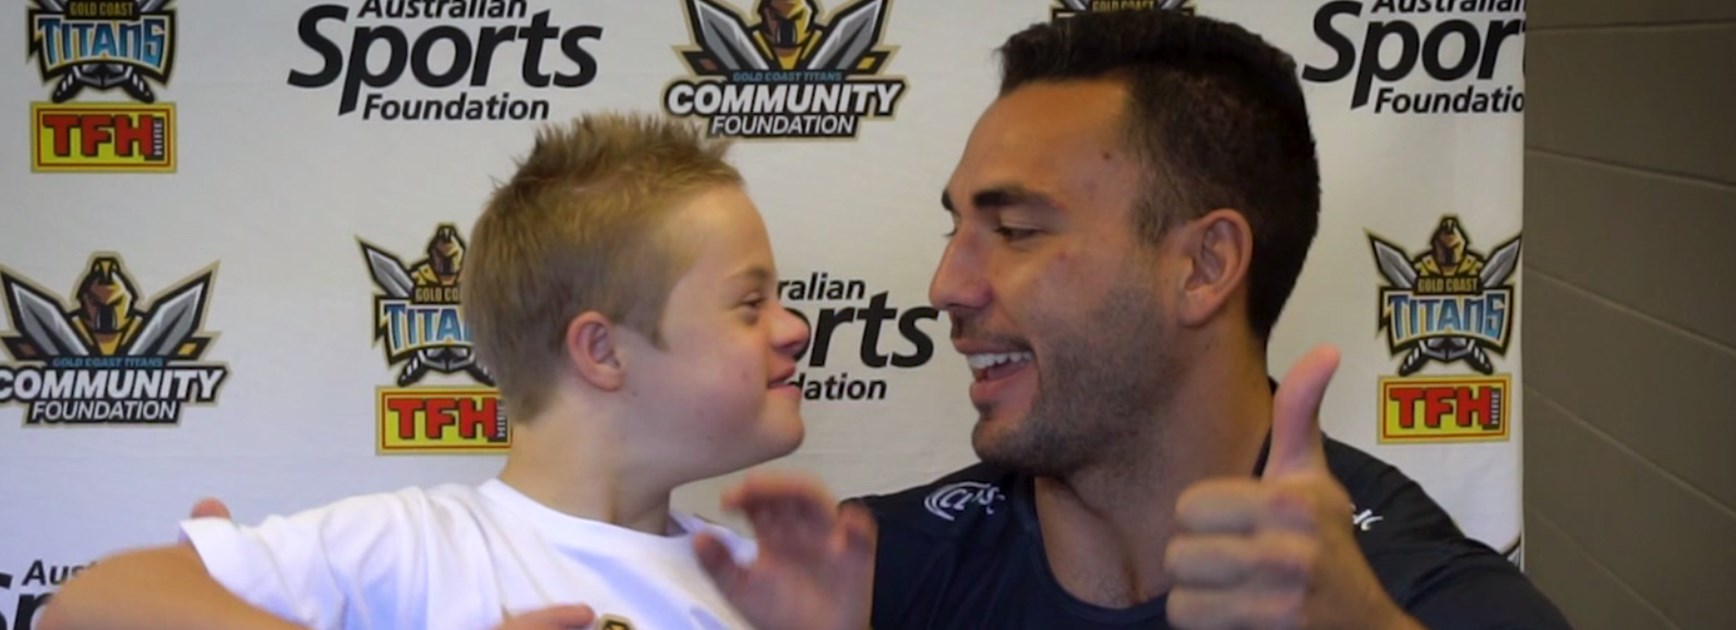 VIDEO: Down Syndrome Queensland takes centre stage!